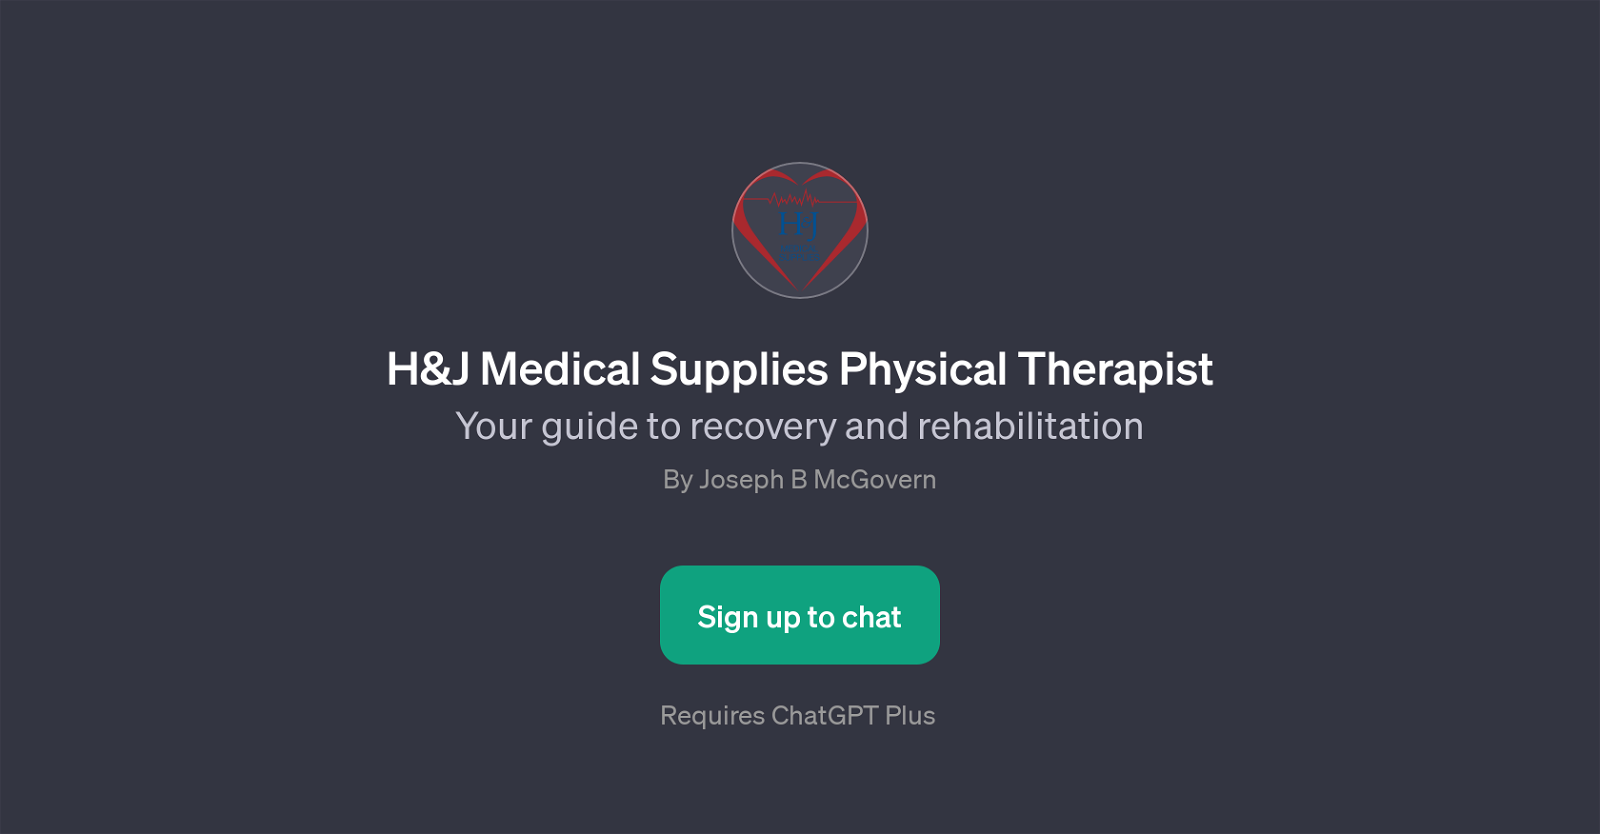 H&J Medical Supplies Physical Therapist website